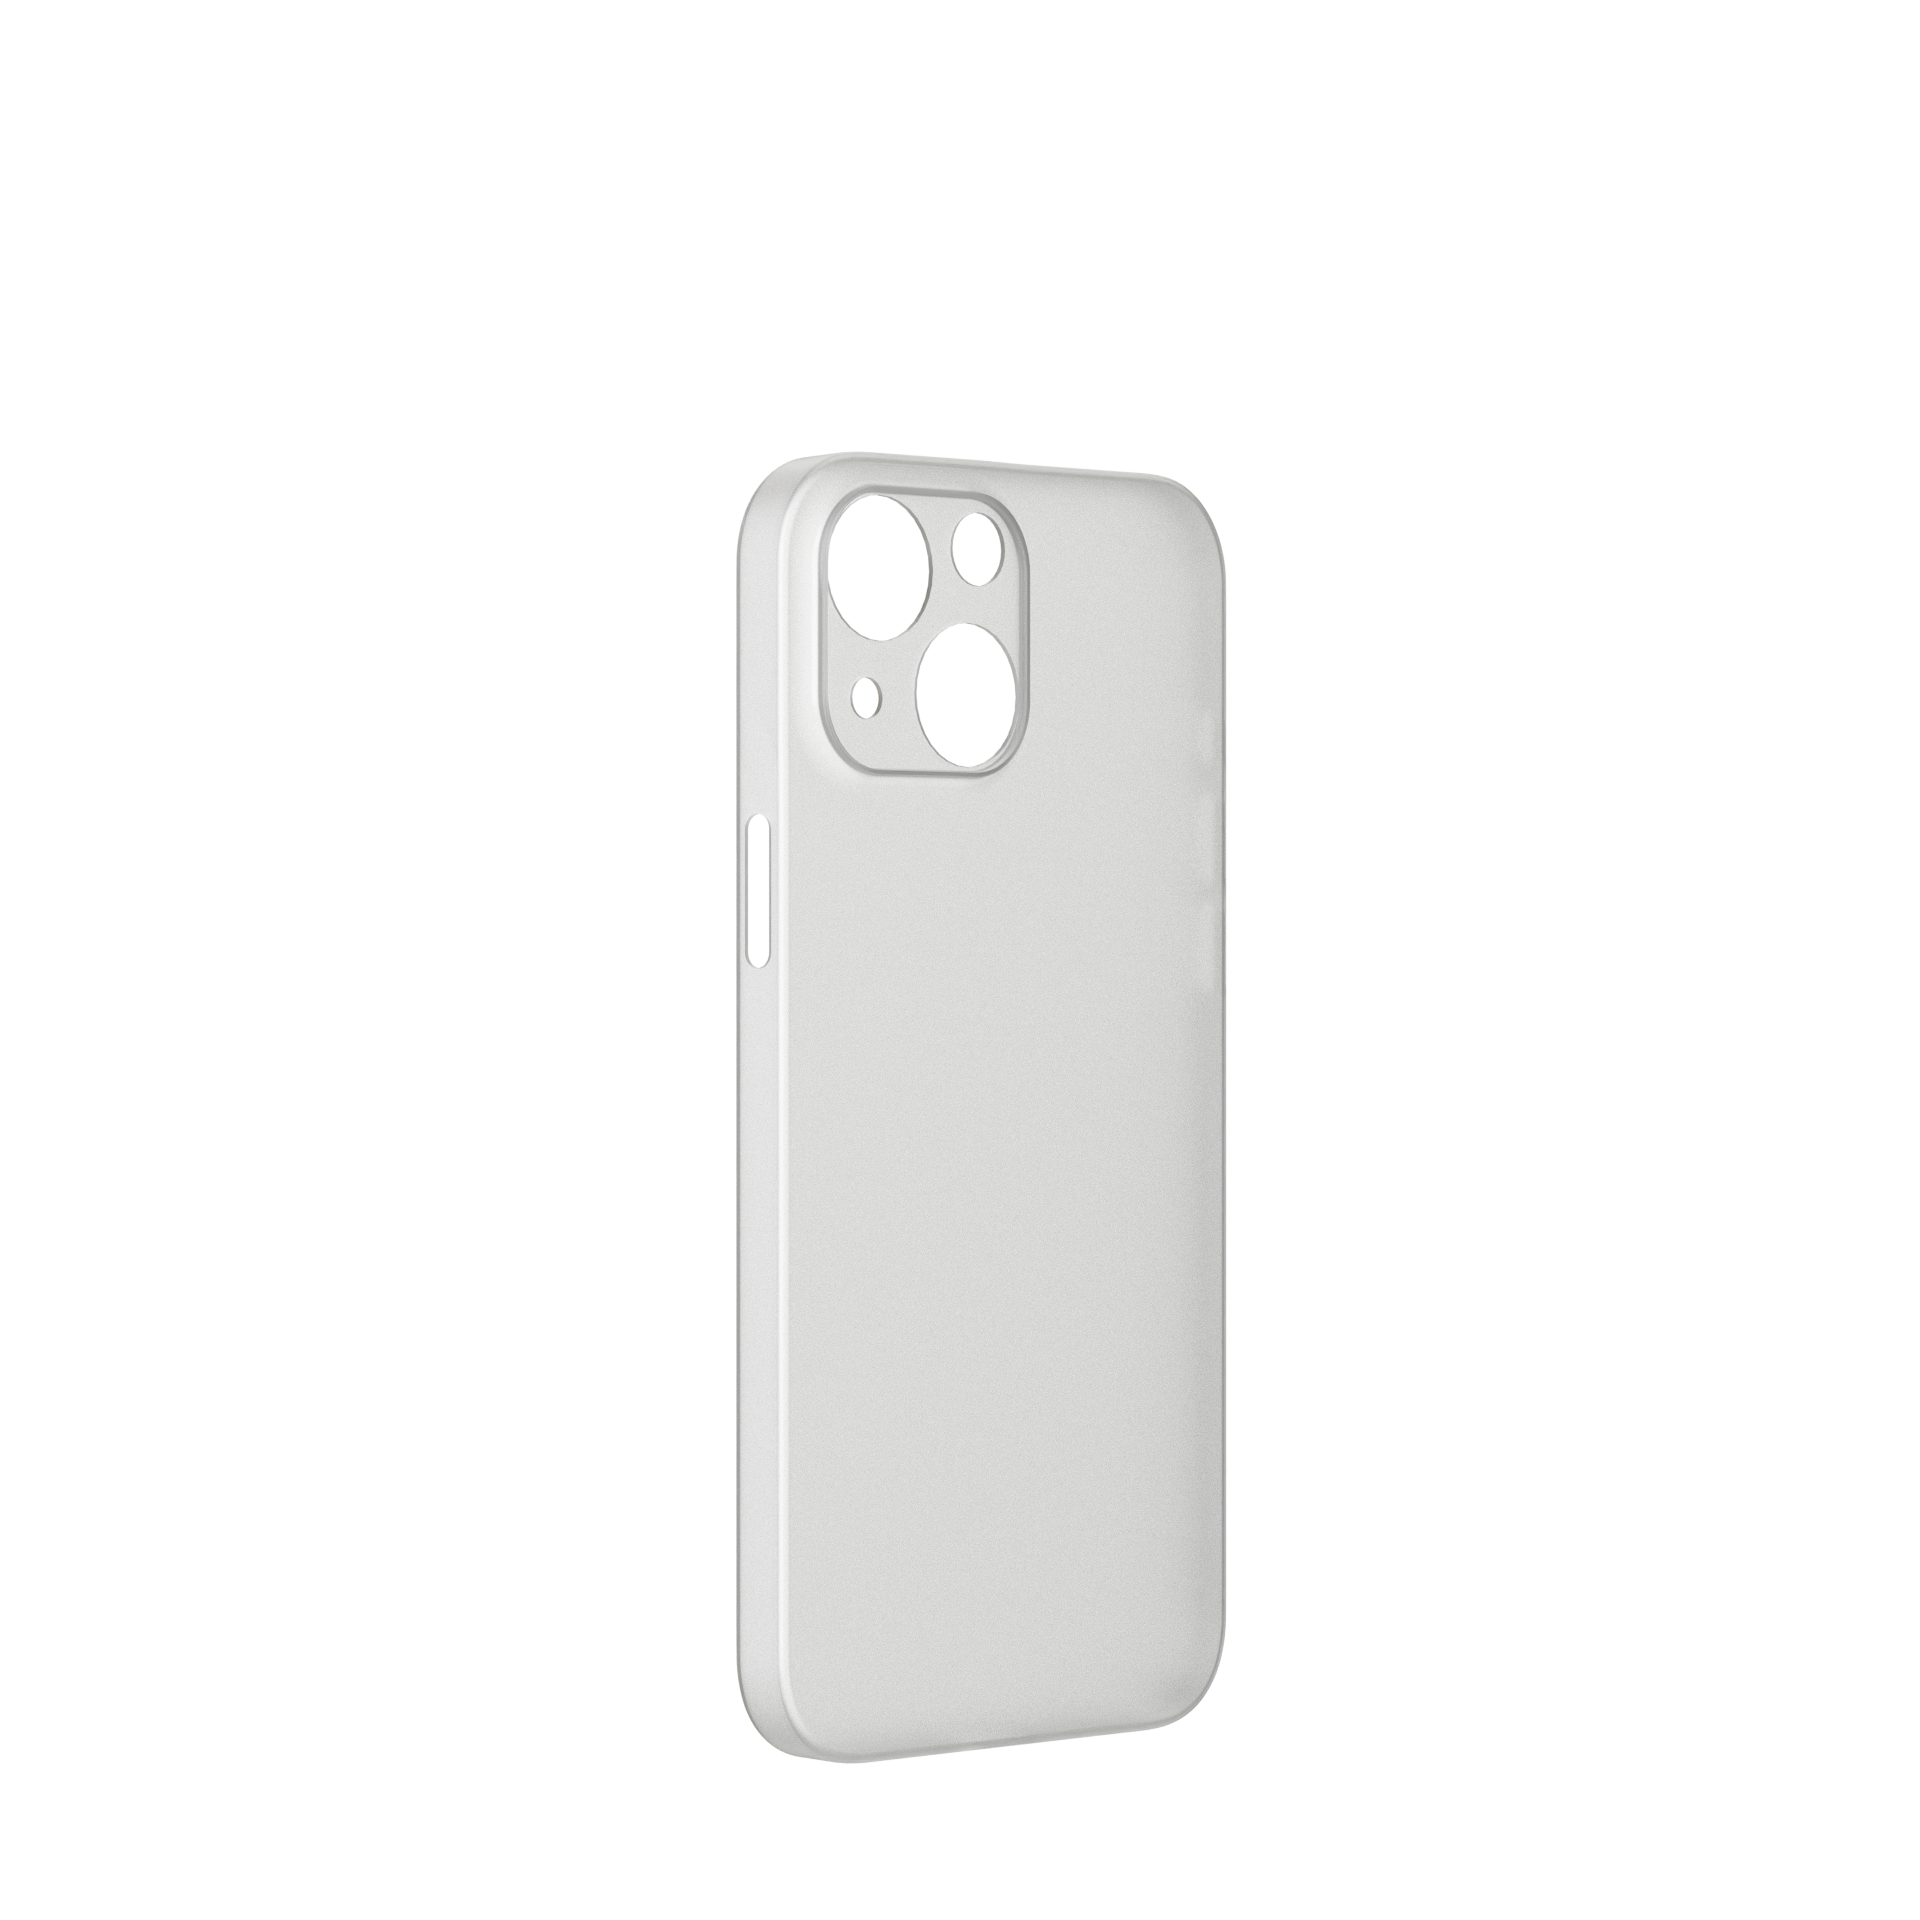 mnml Case Thin iPhone 13 Mini Case - Phnx Frosted White